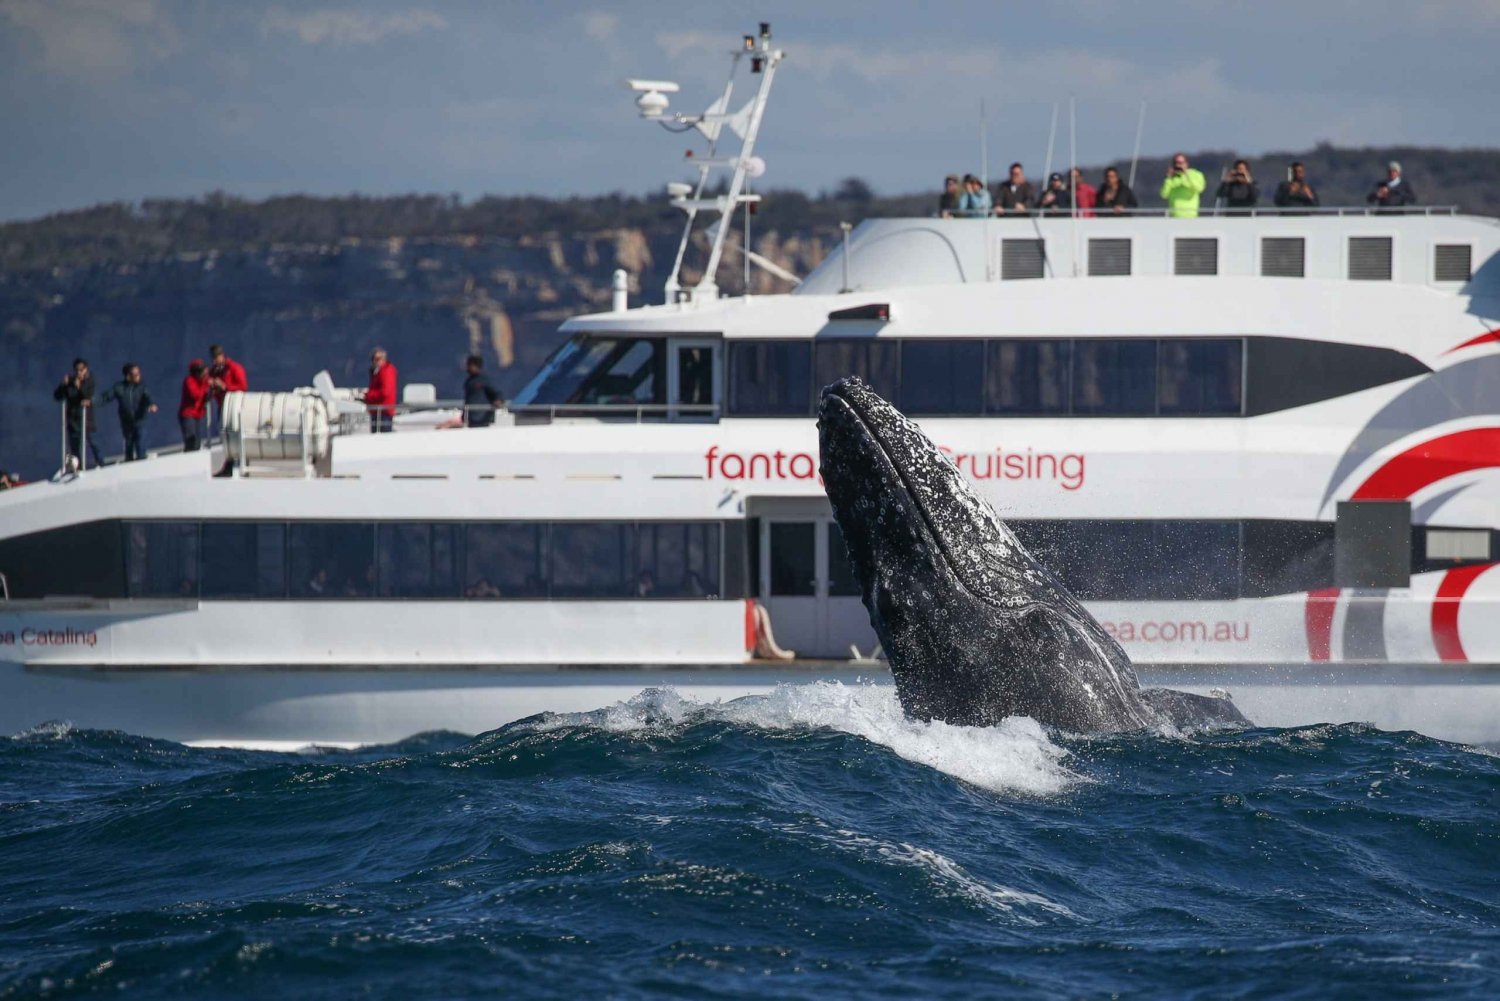 whale watching tour in sydney